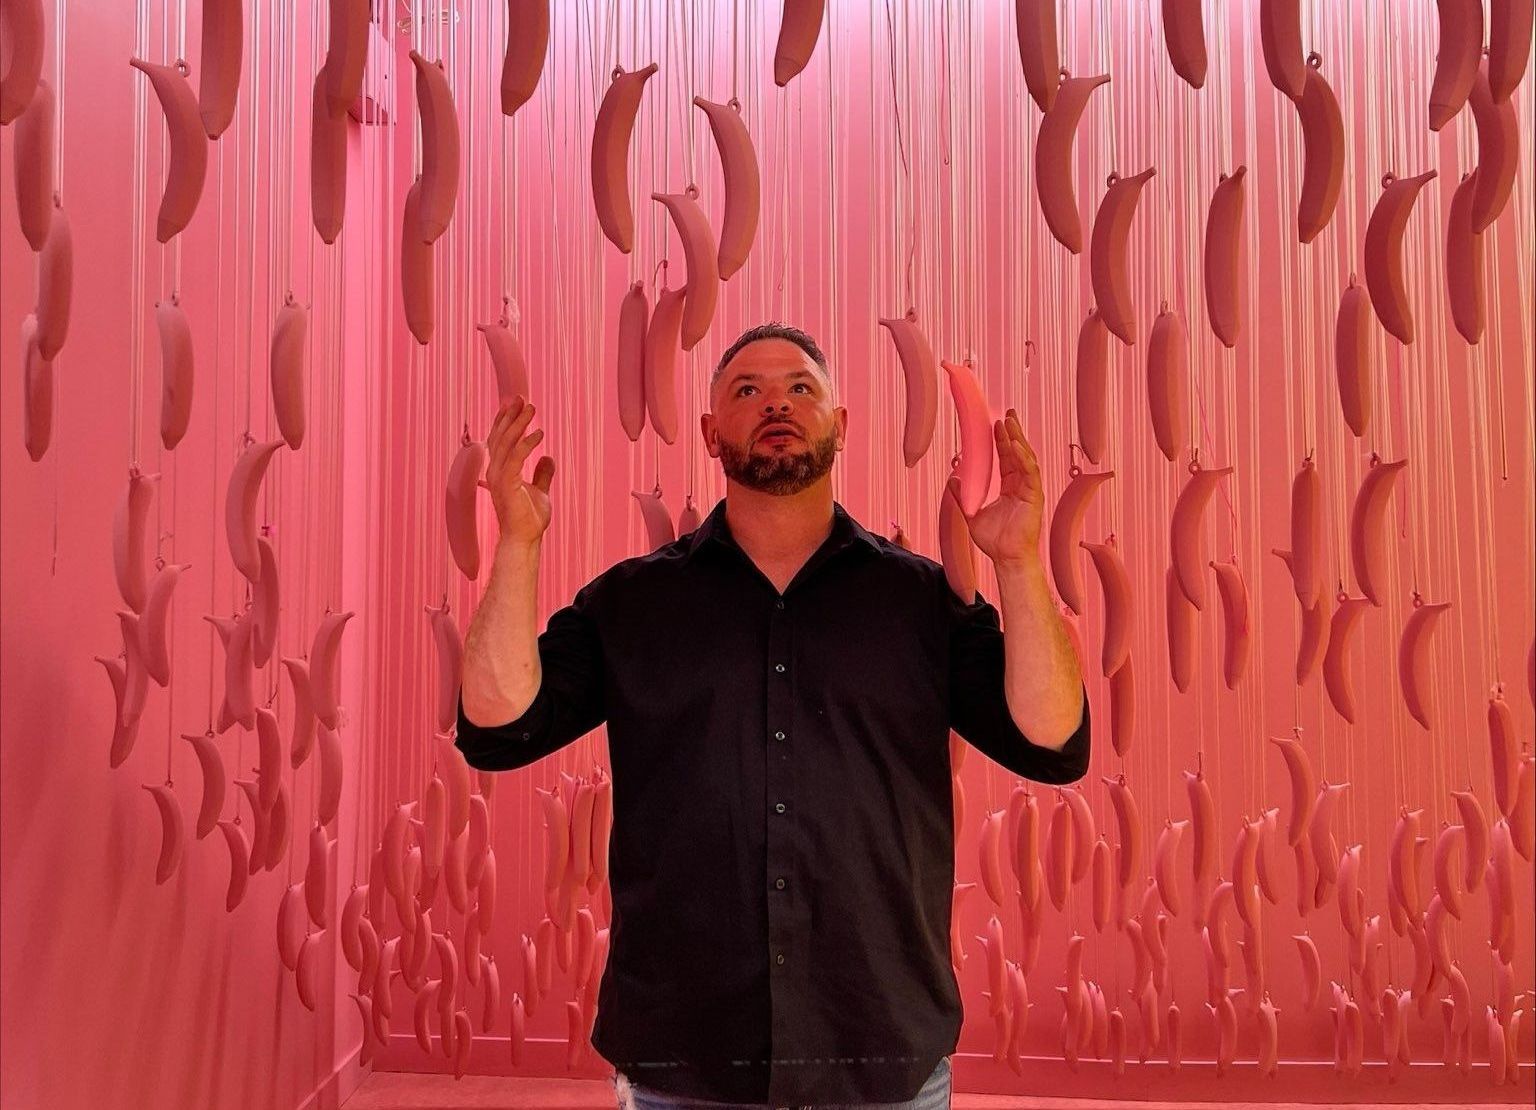 a man is standing in front of a pink wall with bananas hanging from the ceiling .